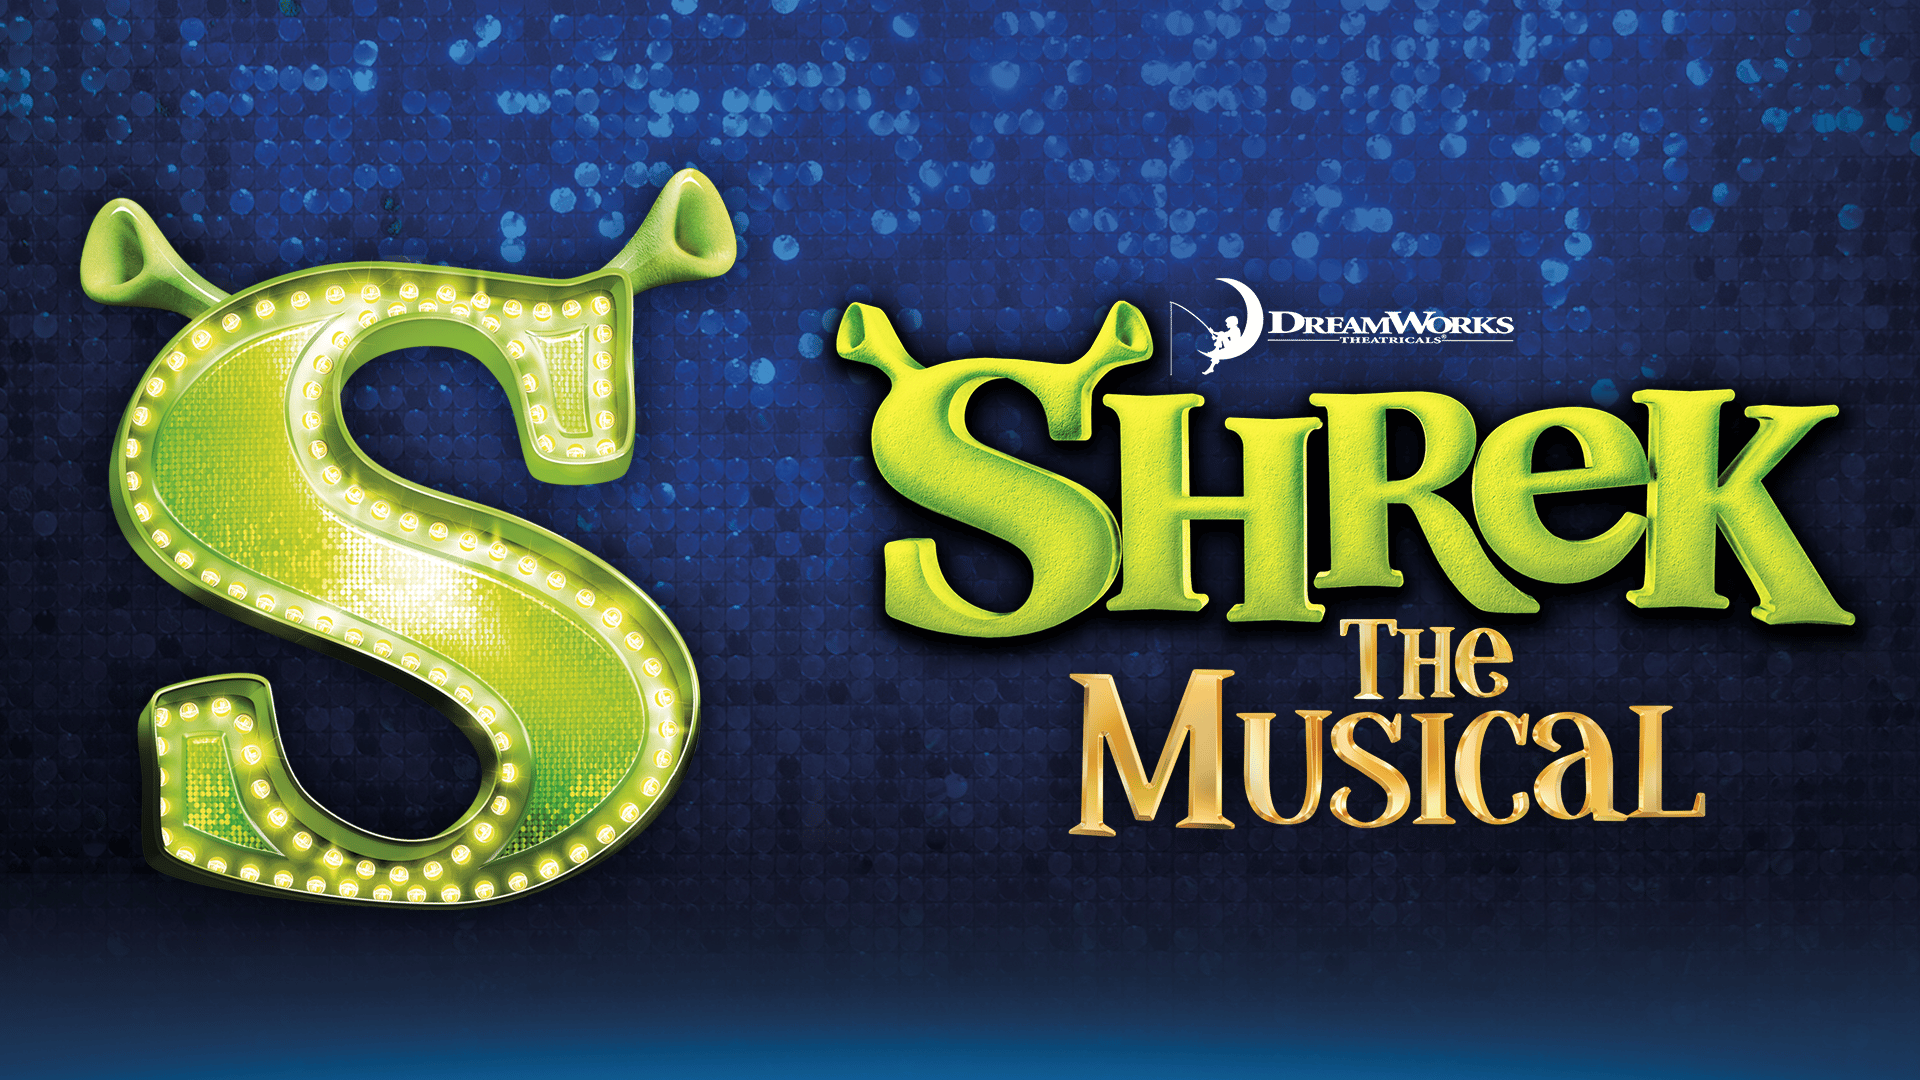 Shrek the Musical artwork – A large ‘S’ with Shrek’s ears on top, beside text reading: ‘Dreamworks Theatricals. Shrek The Musical’. Blue sequin background.